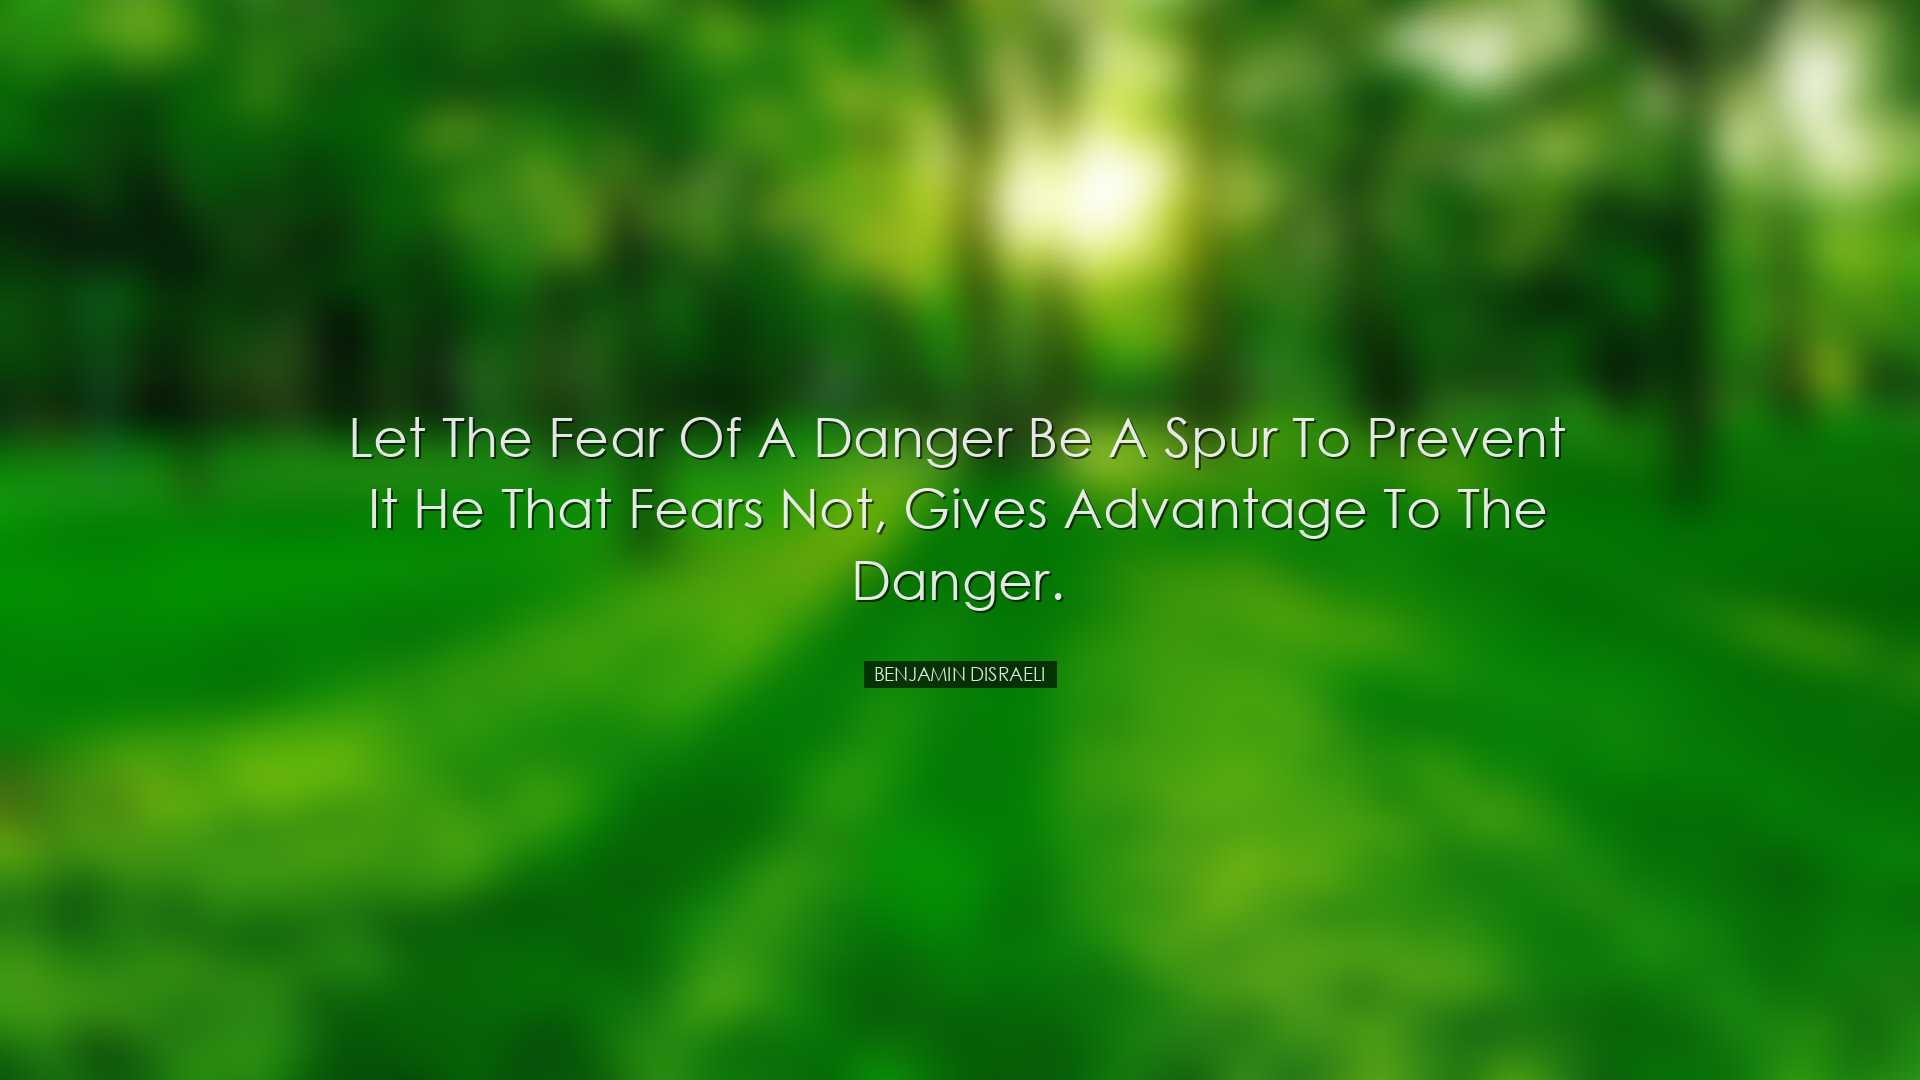 Let the fear of a danger be a spur to prevent it he that fears not